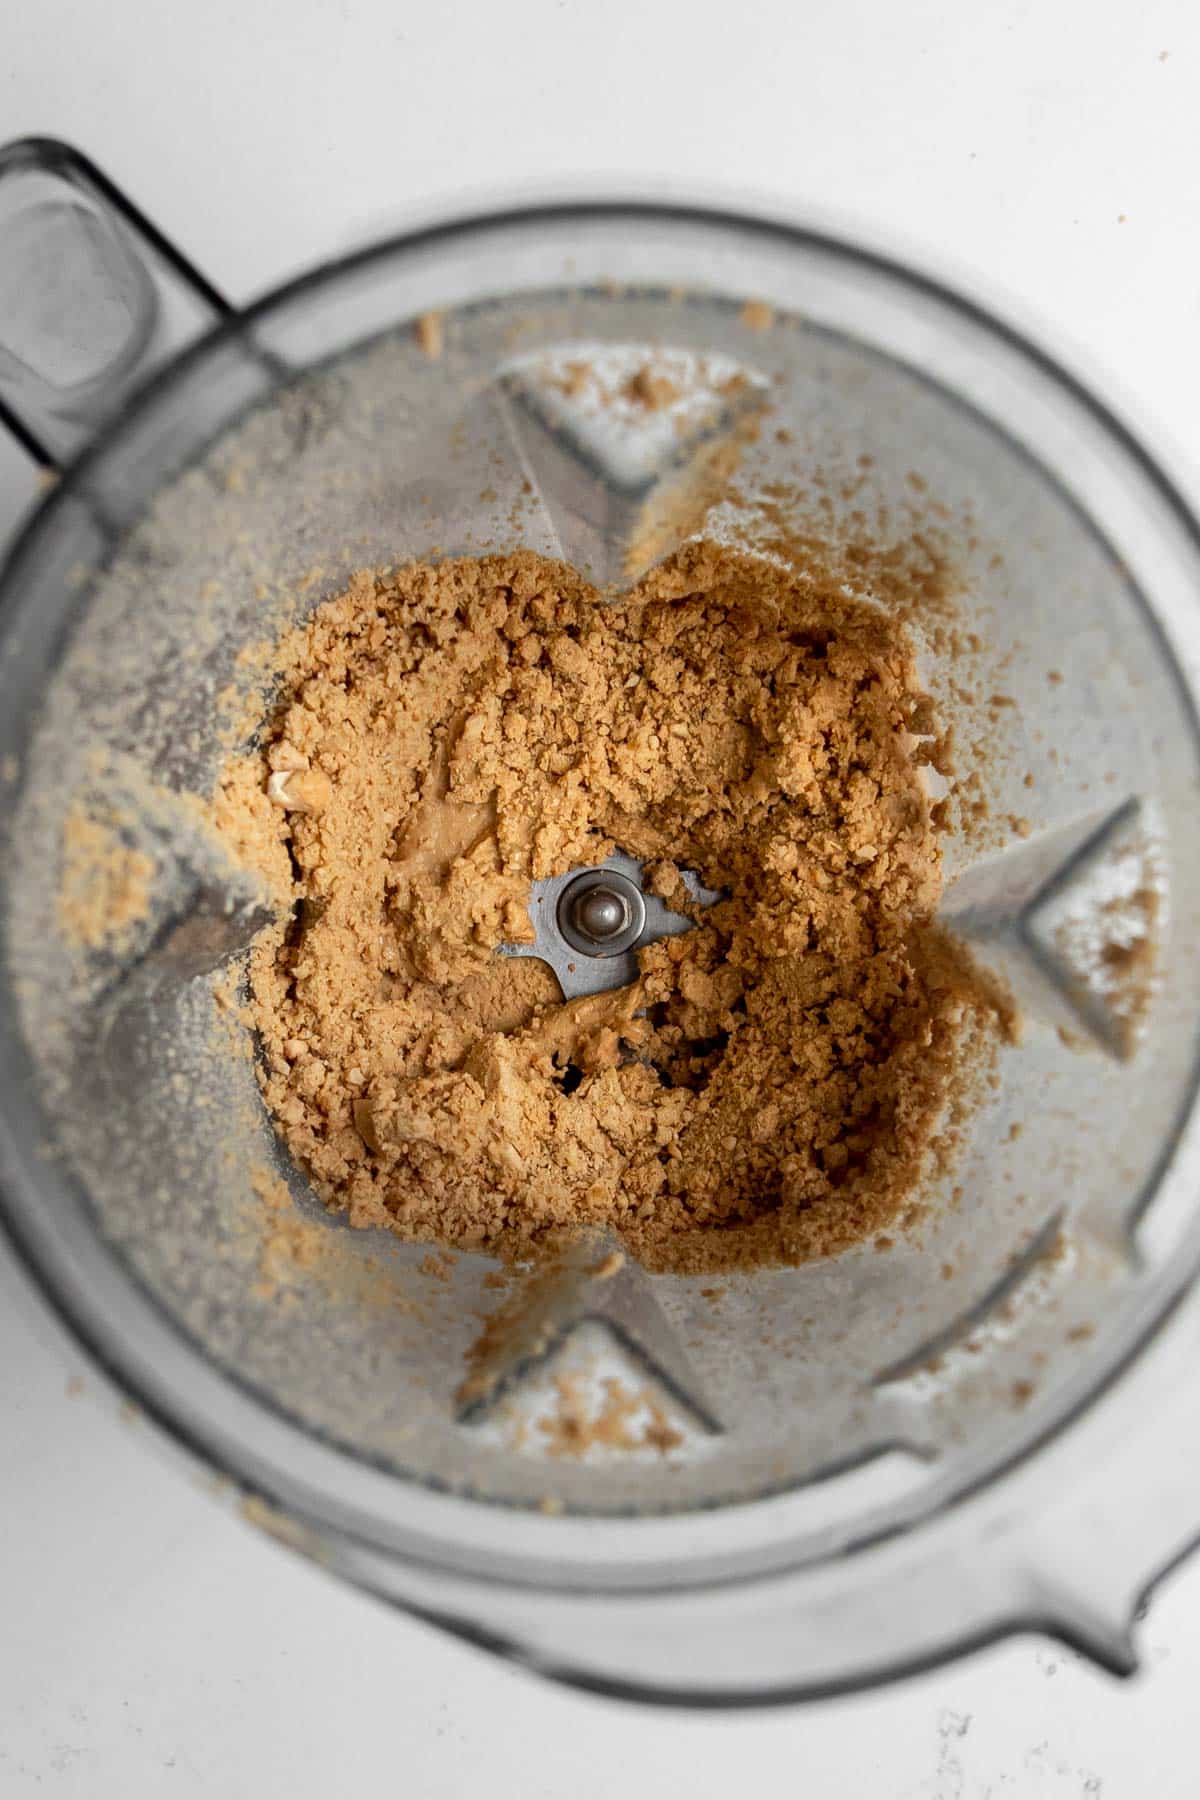 Cashew paste or crumble in a Vitamix container.